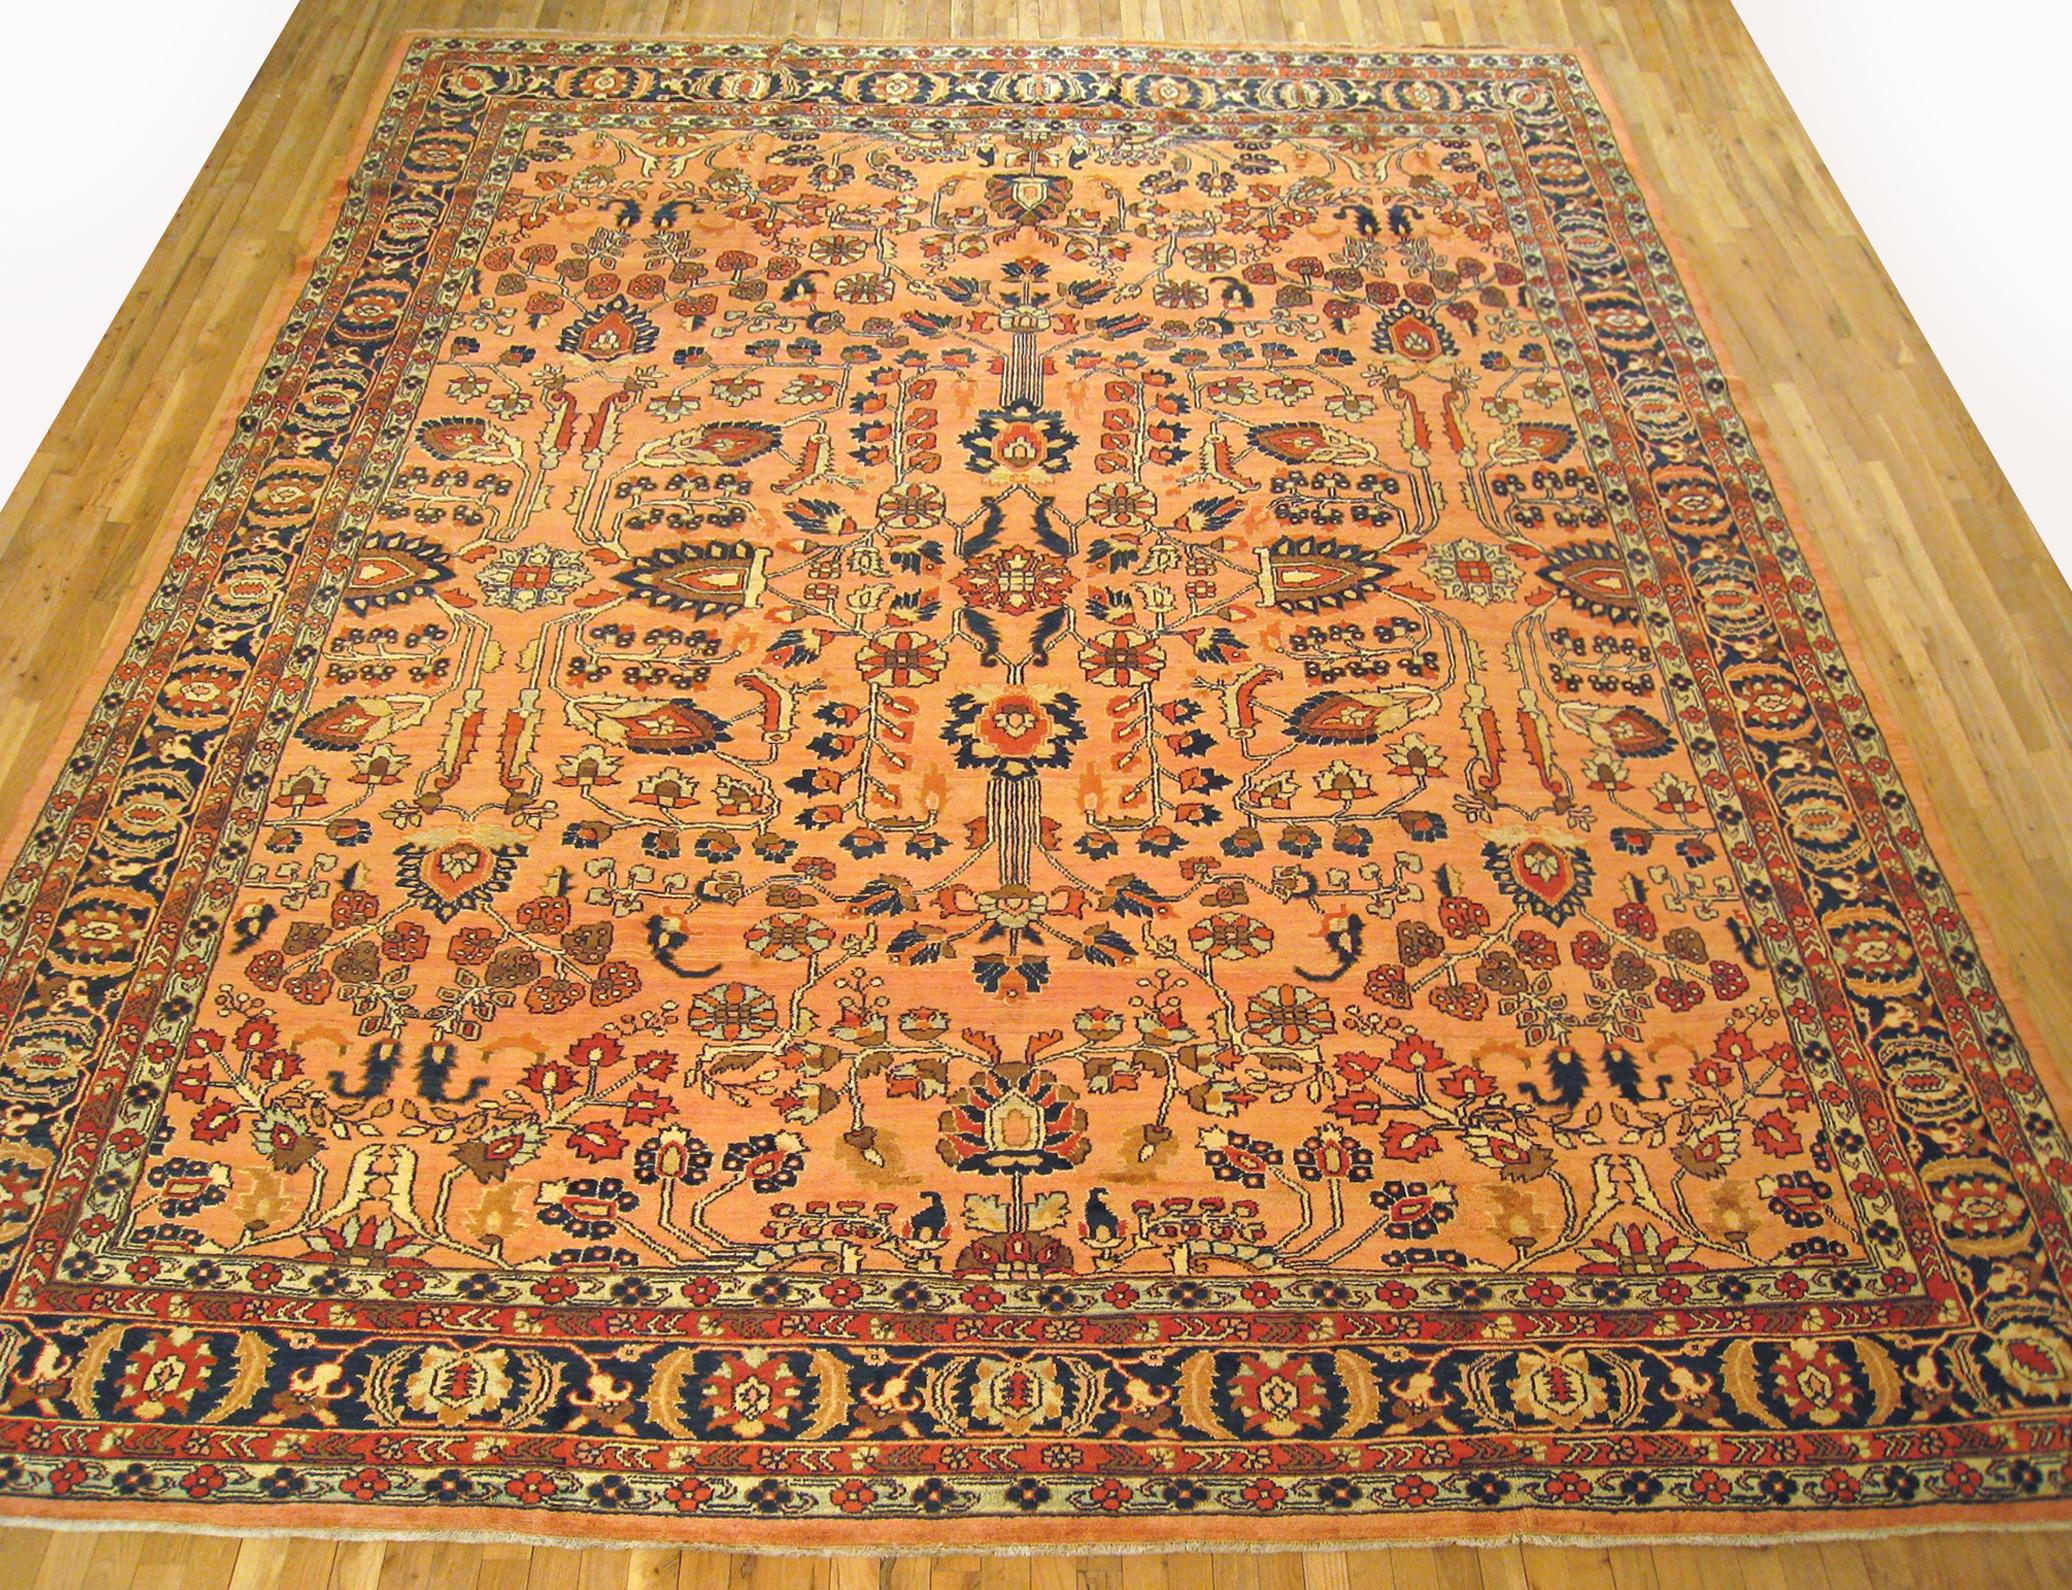 Antique Persian Lilihan rug, room size, circa 1910

A one-of-a-kind antique Persian Lilihan Oriental Carpet, hand-knotted with soft wool pile. This lovely hand-knotted wool rug features floral elements allover the rose field, with an attractive blue